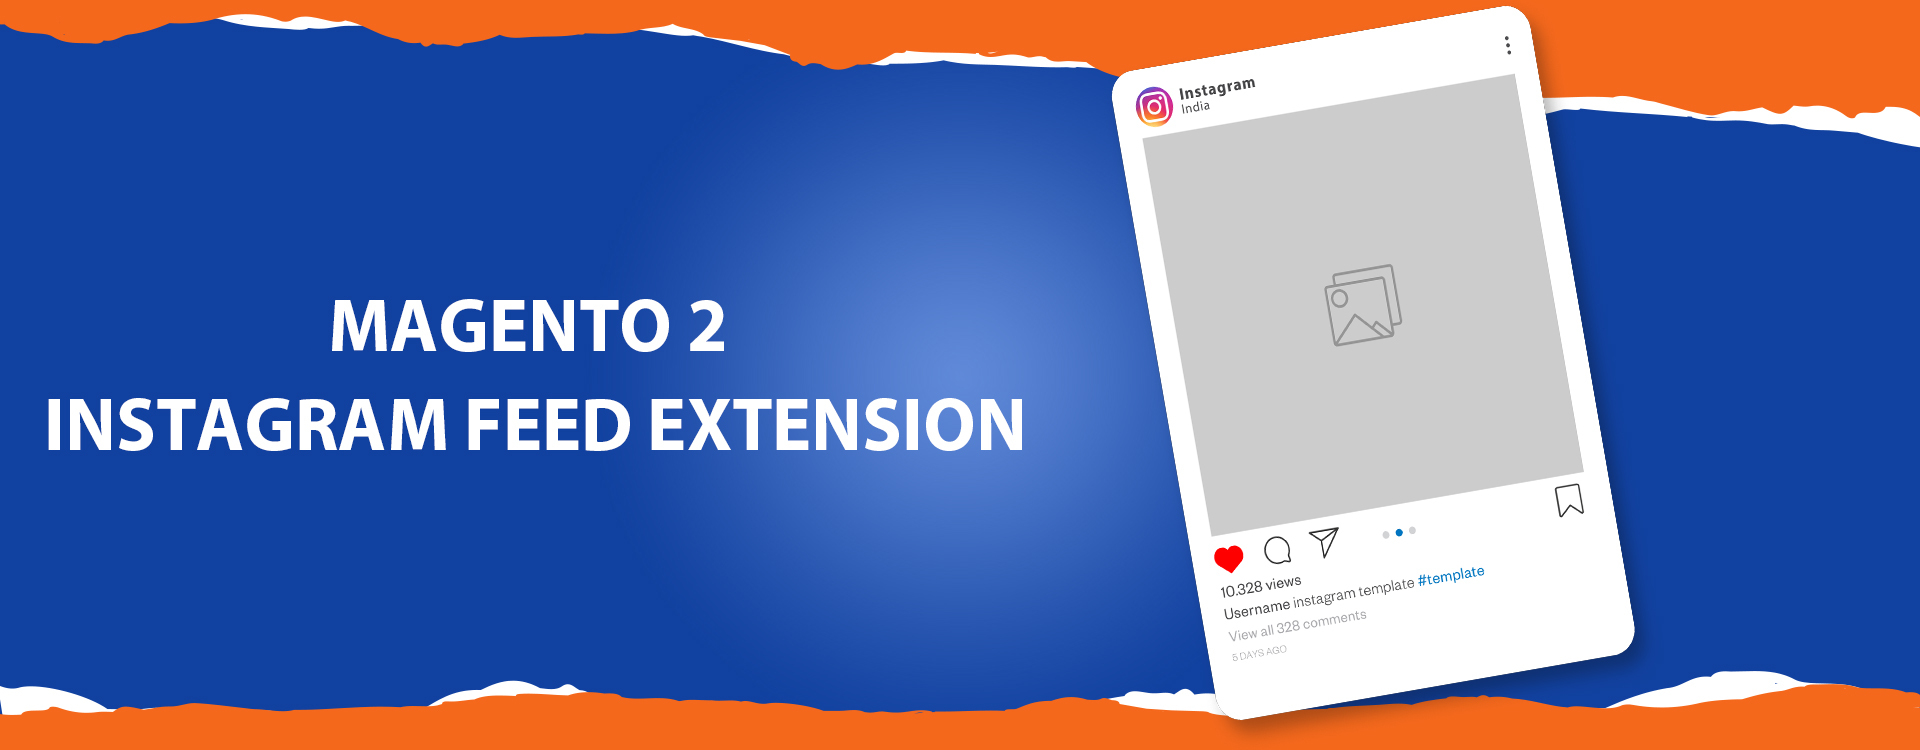 Magento 2 Instagram feed extension